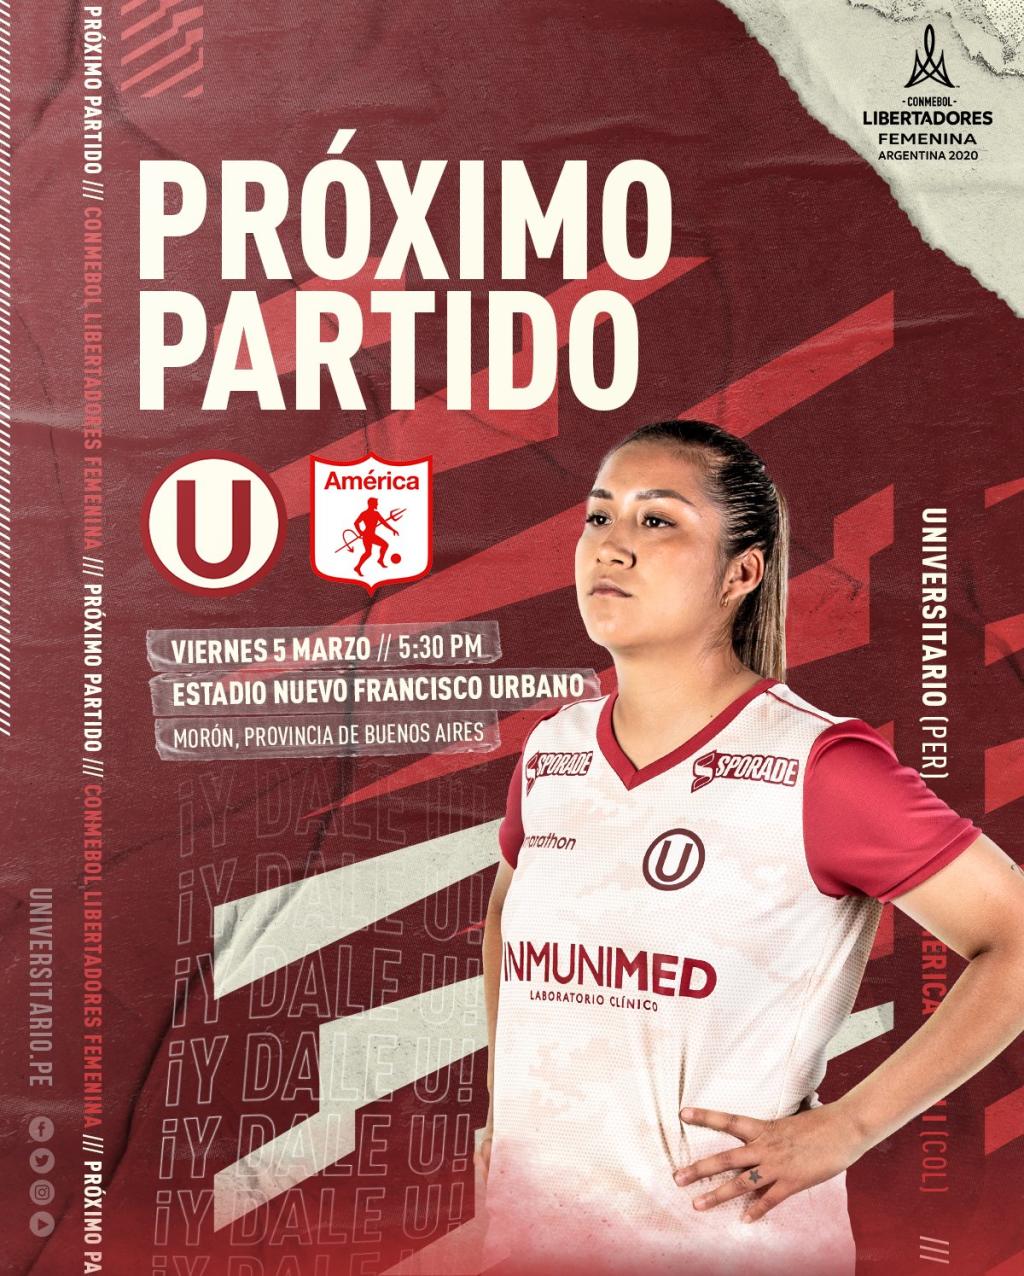 Universitario Vs America De Cali Live Directv Sports Which Channel Broadcasts U Vs America Where They Take Place And How To Watch The Game Of The Copa Libertadores Femenina At What Time